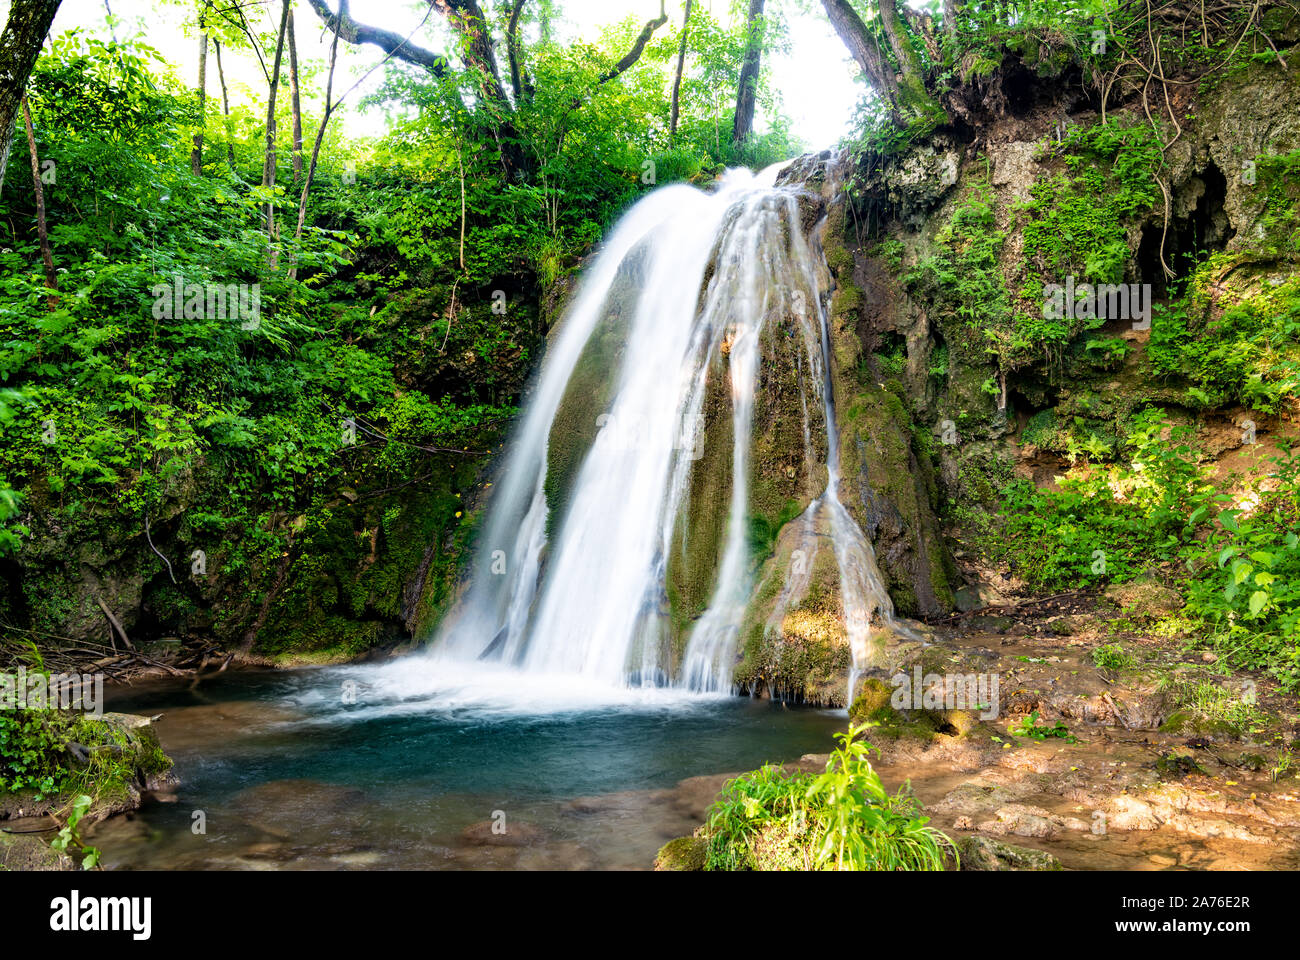 Beautiful waterfalls in village Donji Taor, Taorska vrela. Green plants and moss bloom next to water, which flows down the cascading limestone rocks. Stock Photo